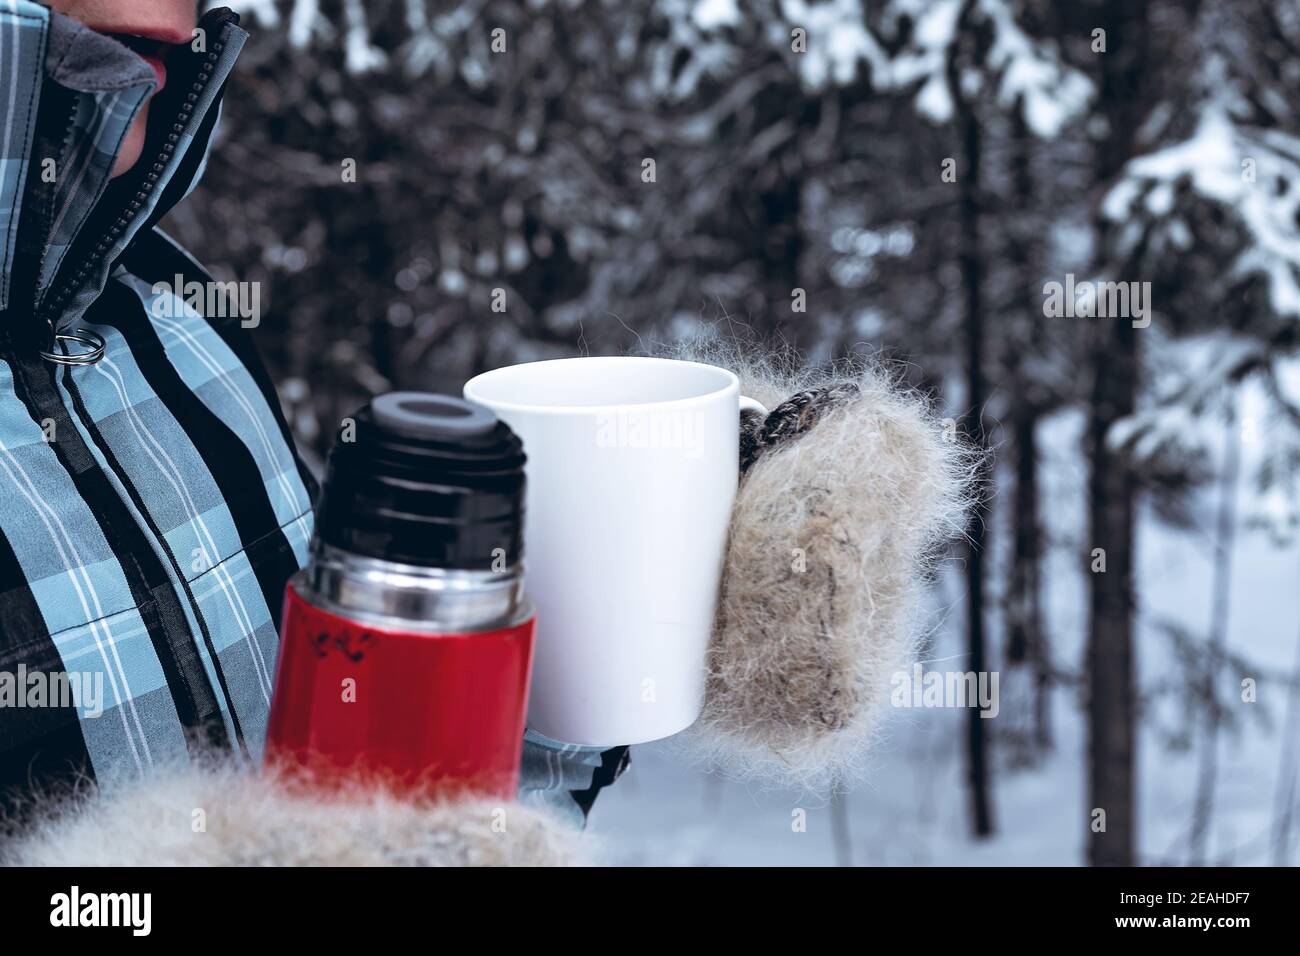 https://c8.alamy.com/comp/2EAHDF7/close-up-woman-in-a-warm-clothing-holds-a-red-thermos-with-a-hot-drink-and-a-white-mug-winter-forest-background-2EAHDF7.jpg